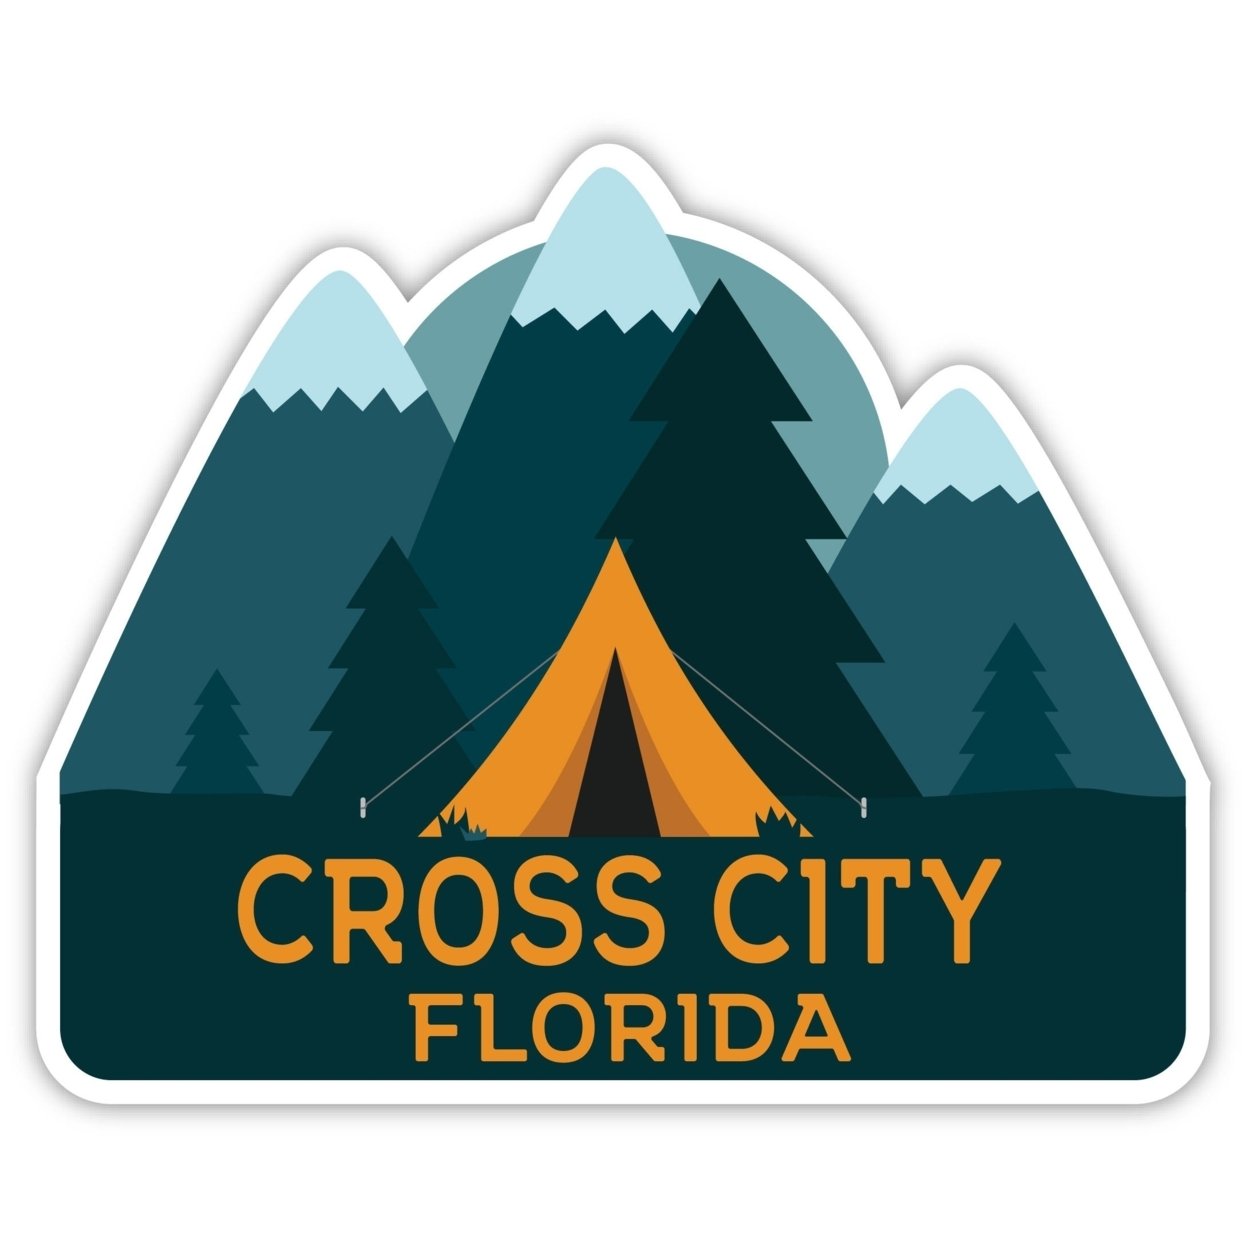 Cross City Florida Souvenir Decorative Stickers (Choose Theme And Size) - 4-Pack, 10-Inch, Tent